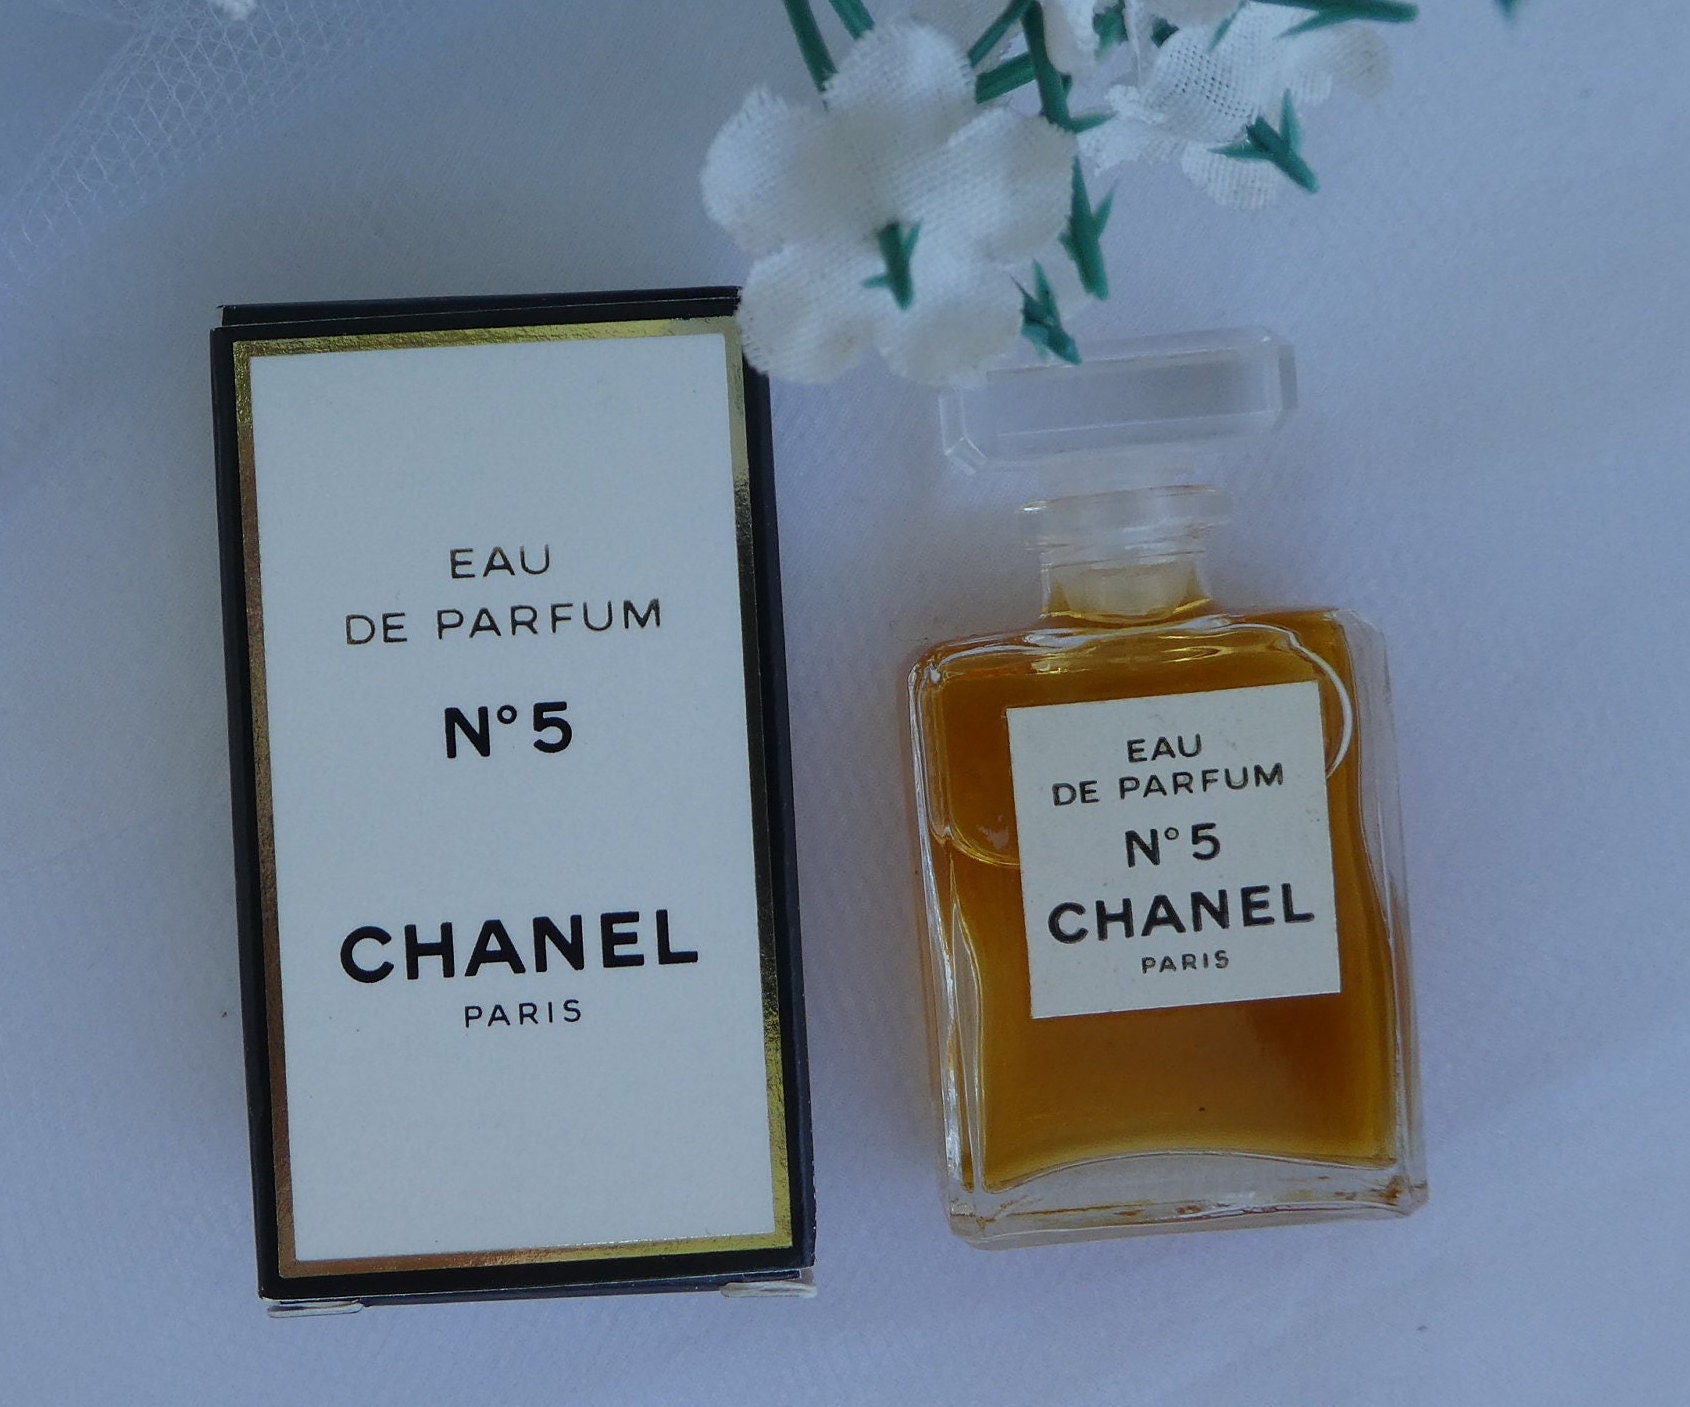 CHANEL No 5 French Perfume Boxed. 4mls. Chanel - Etsy